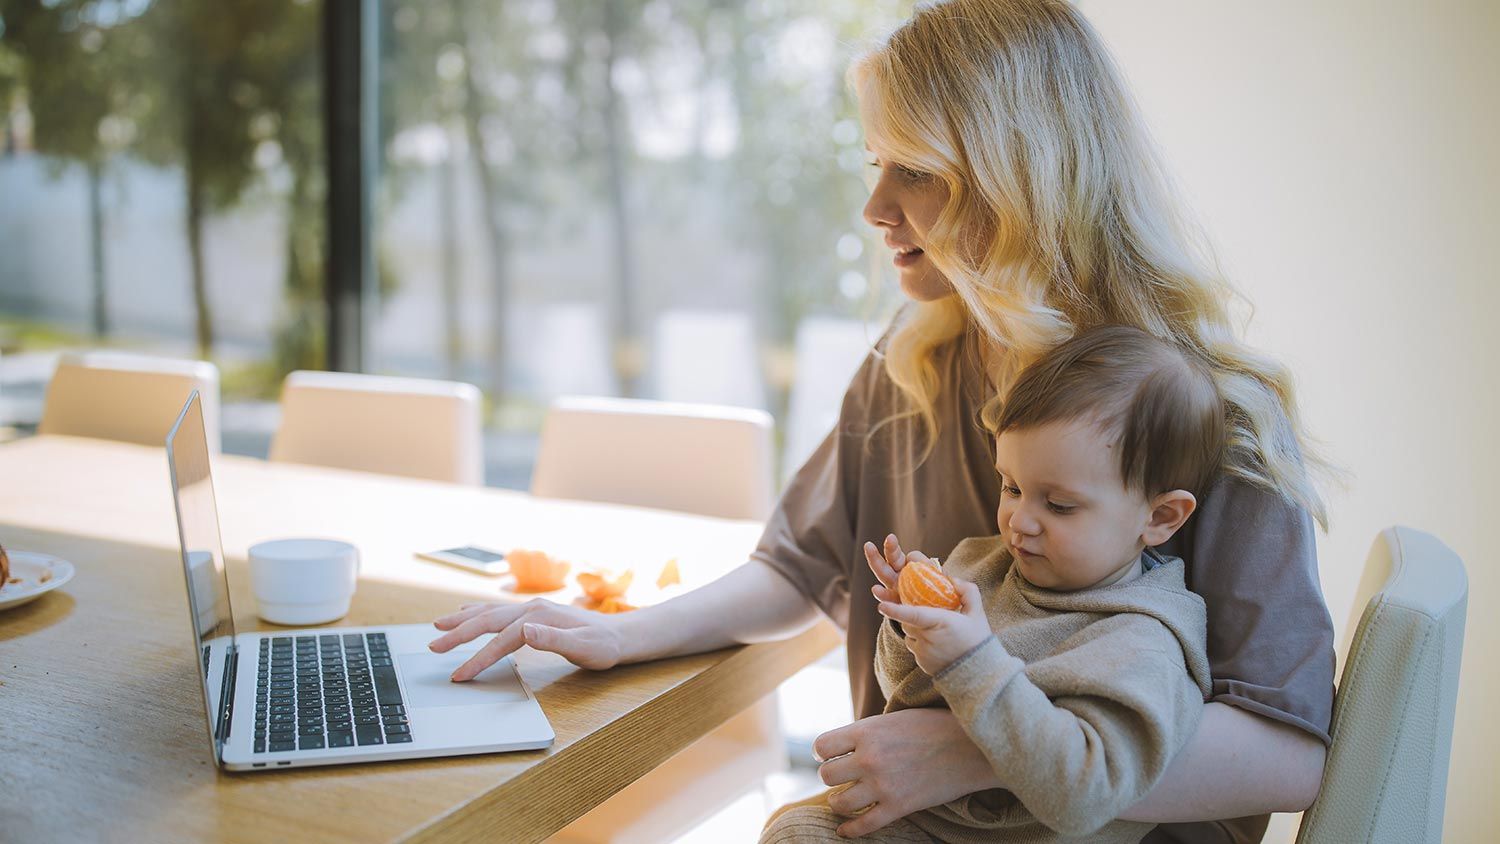 Woman with a baby working on a computer